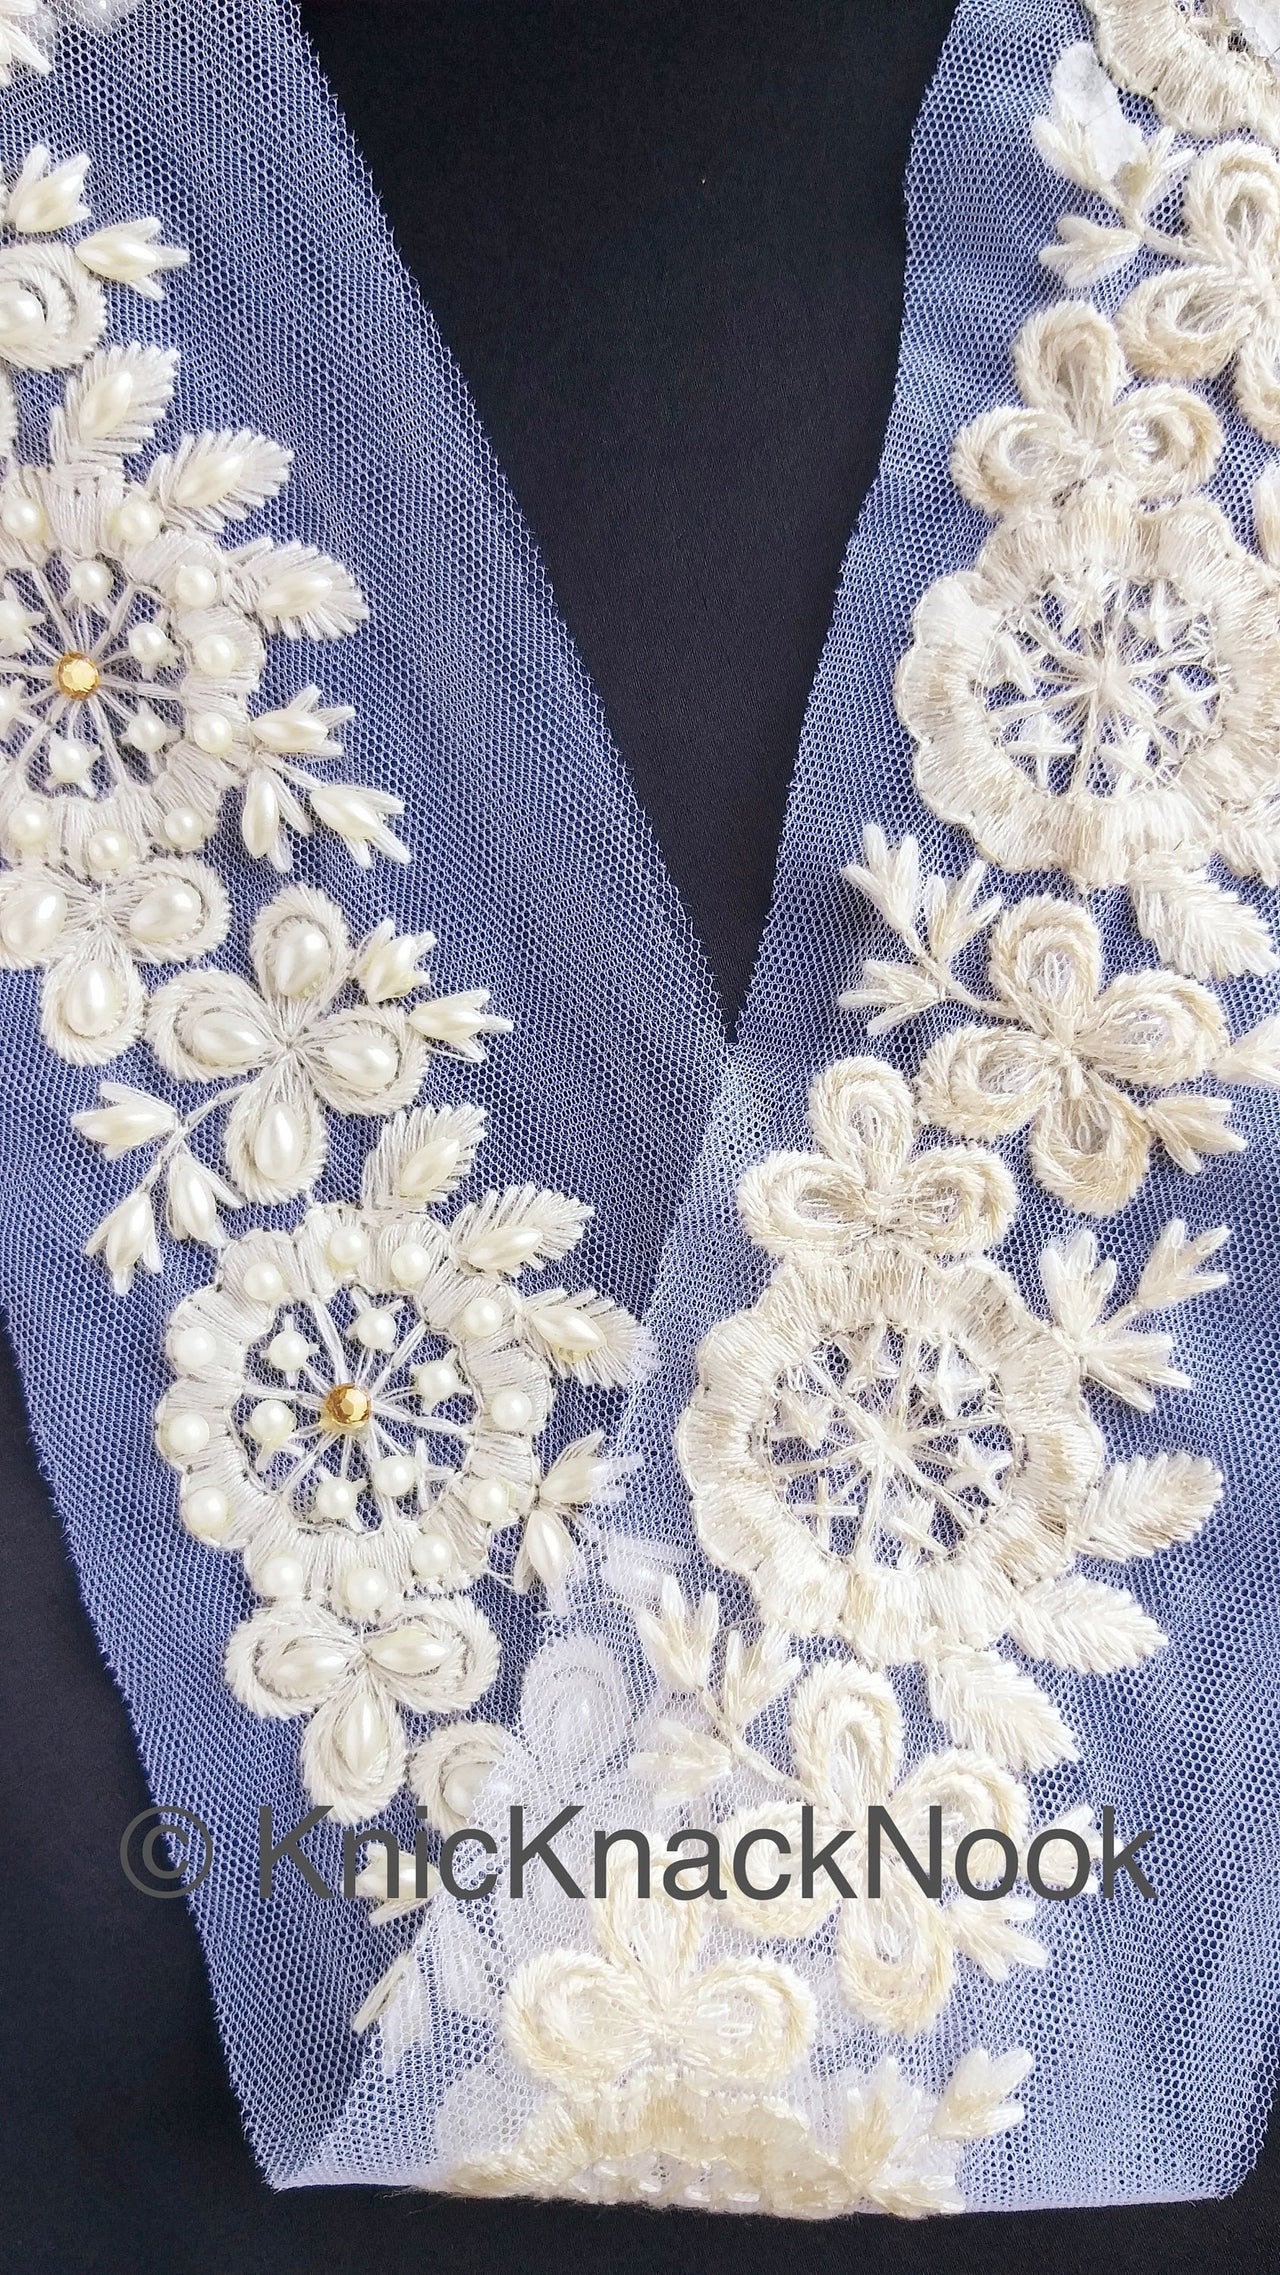 White Pearl And Rhinestones Beads Net Lace Trim, Floral Trim, One Yard